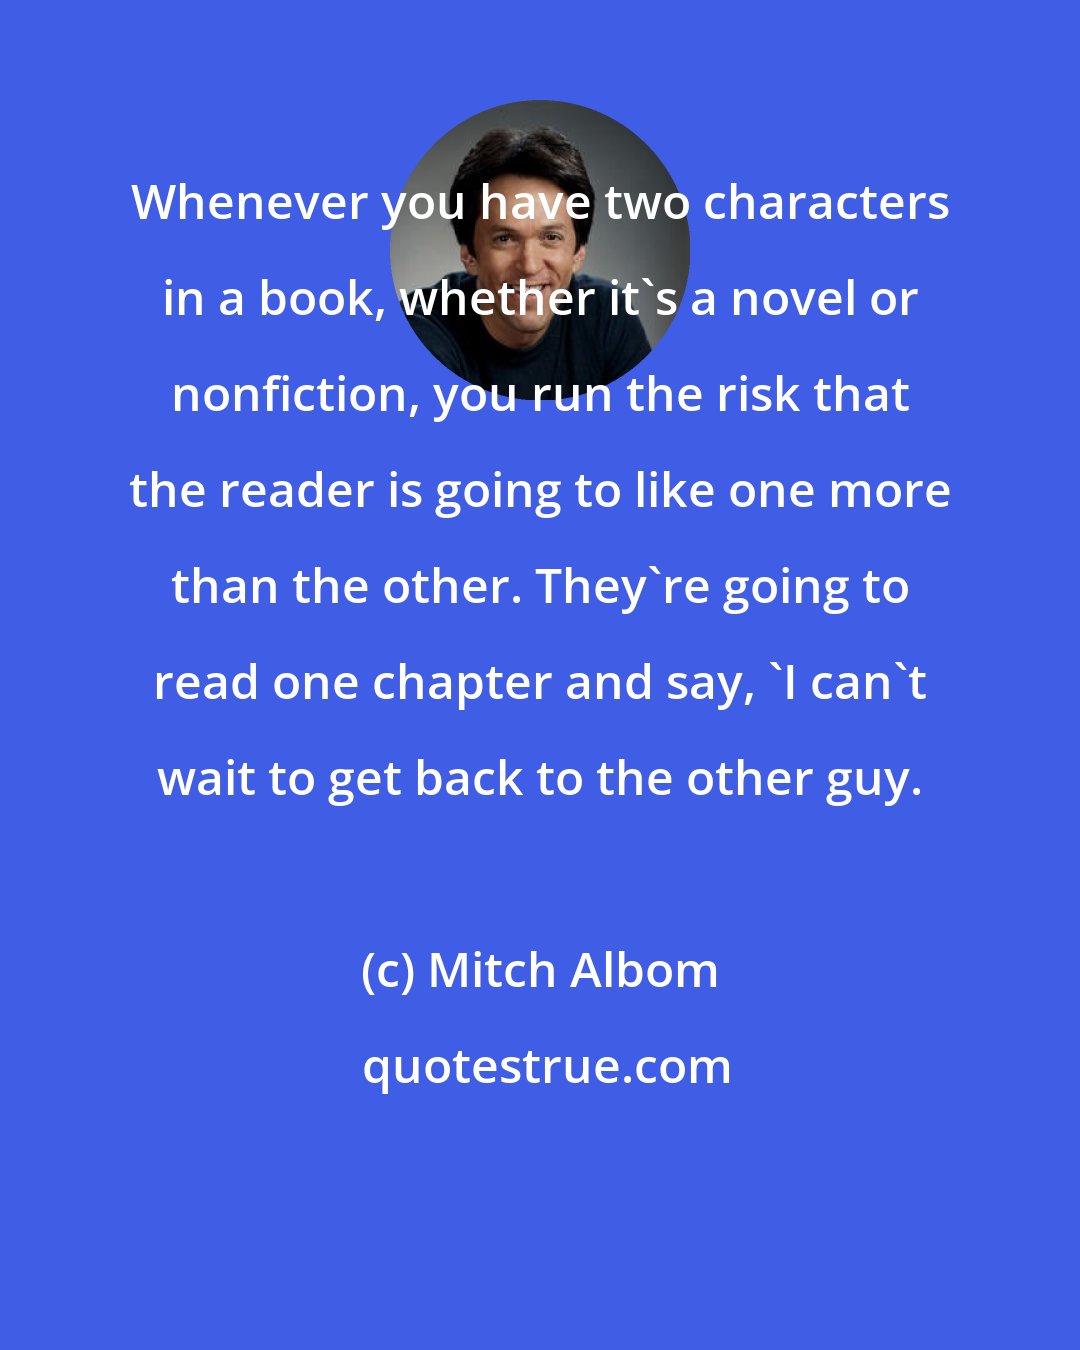 Mitch Albom: Whenever you have two characters in a book, whether it's a novel or nonfiction, you run the risk that the reader is going to like one more than the other. They're going to read one chapter and say, 'I can't wait to get back to the other guy.